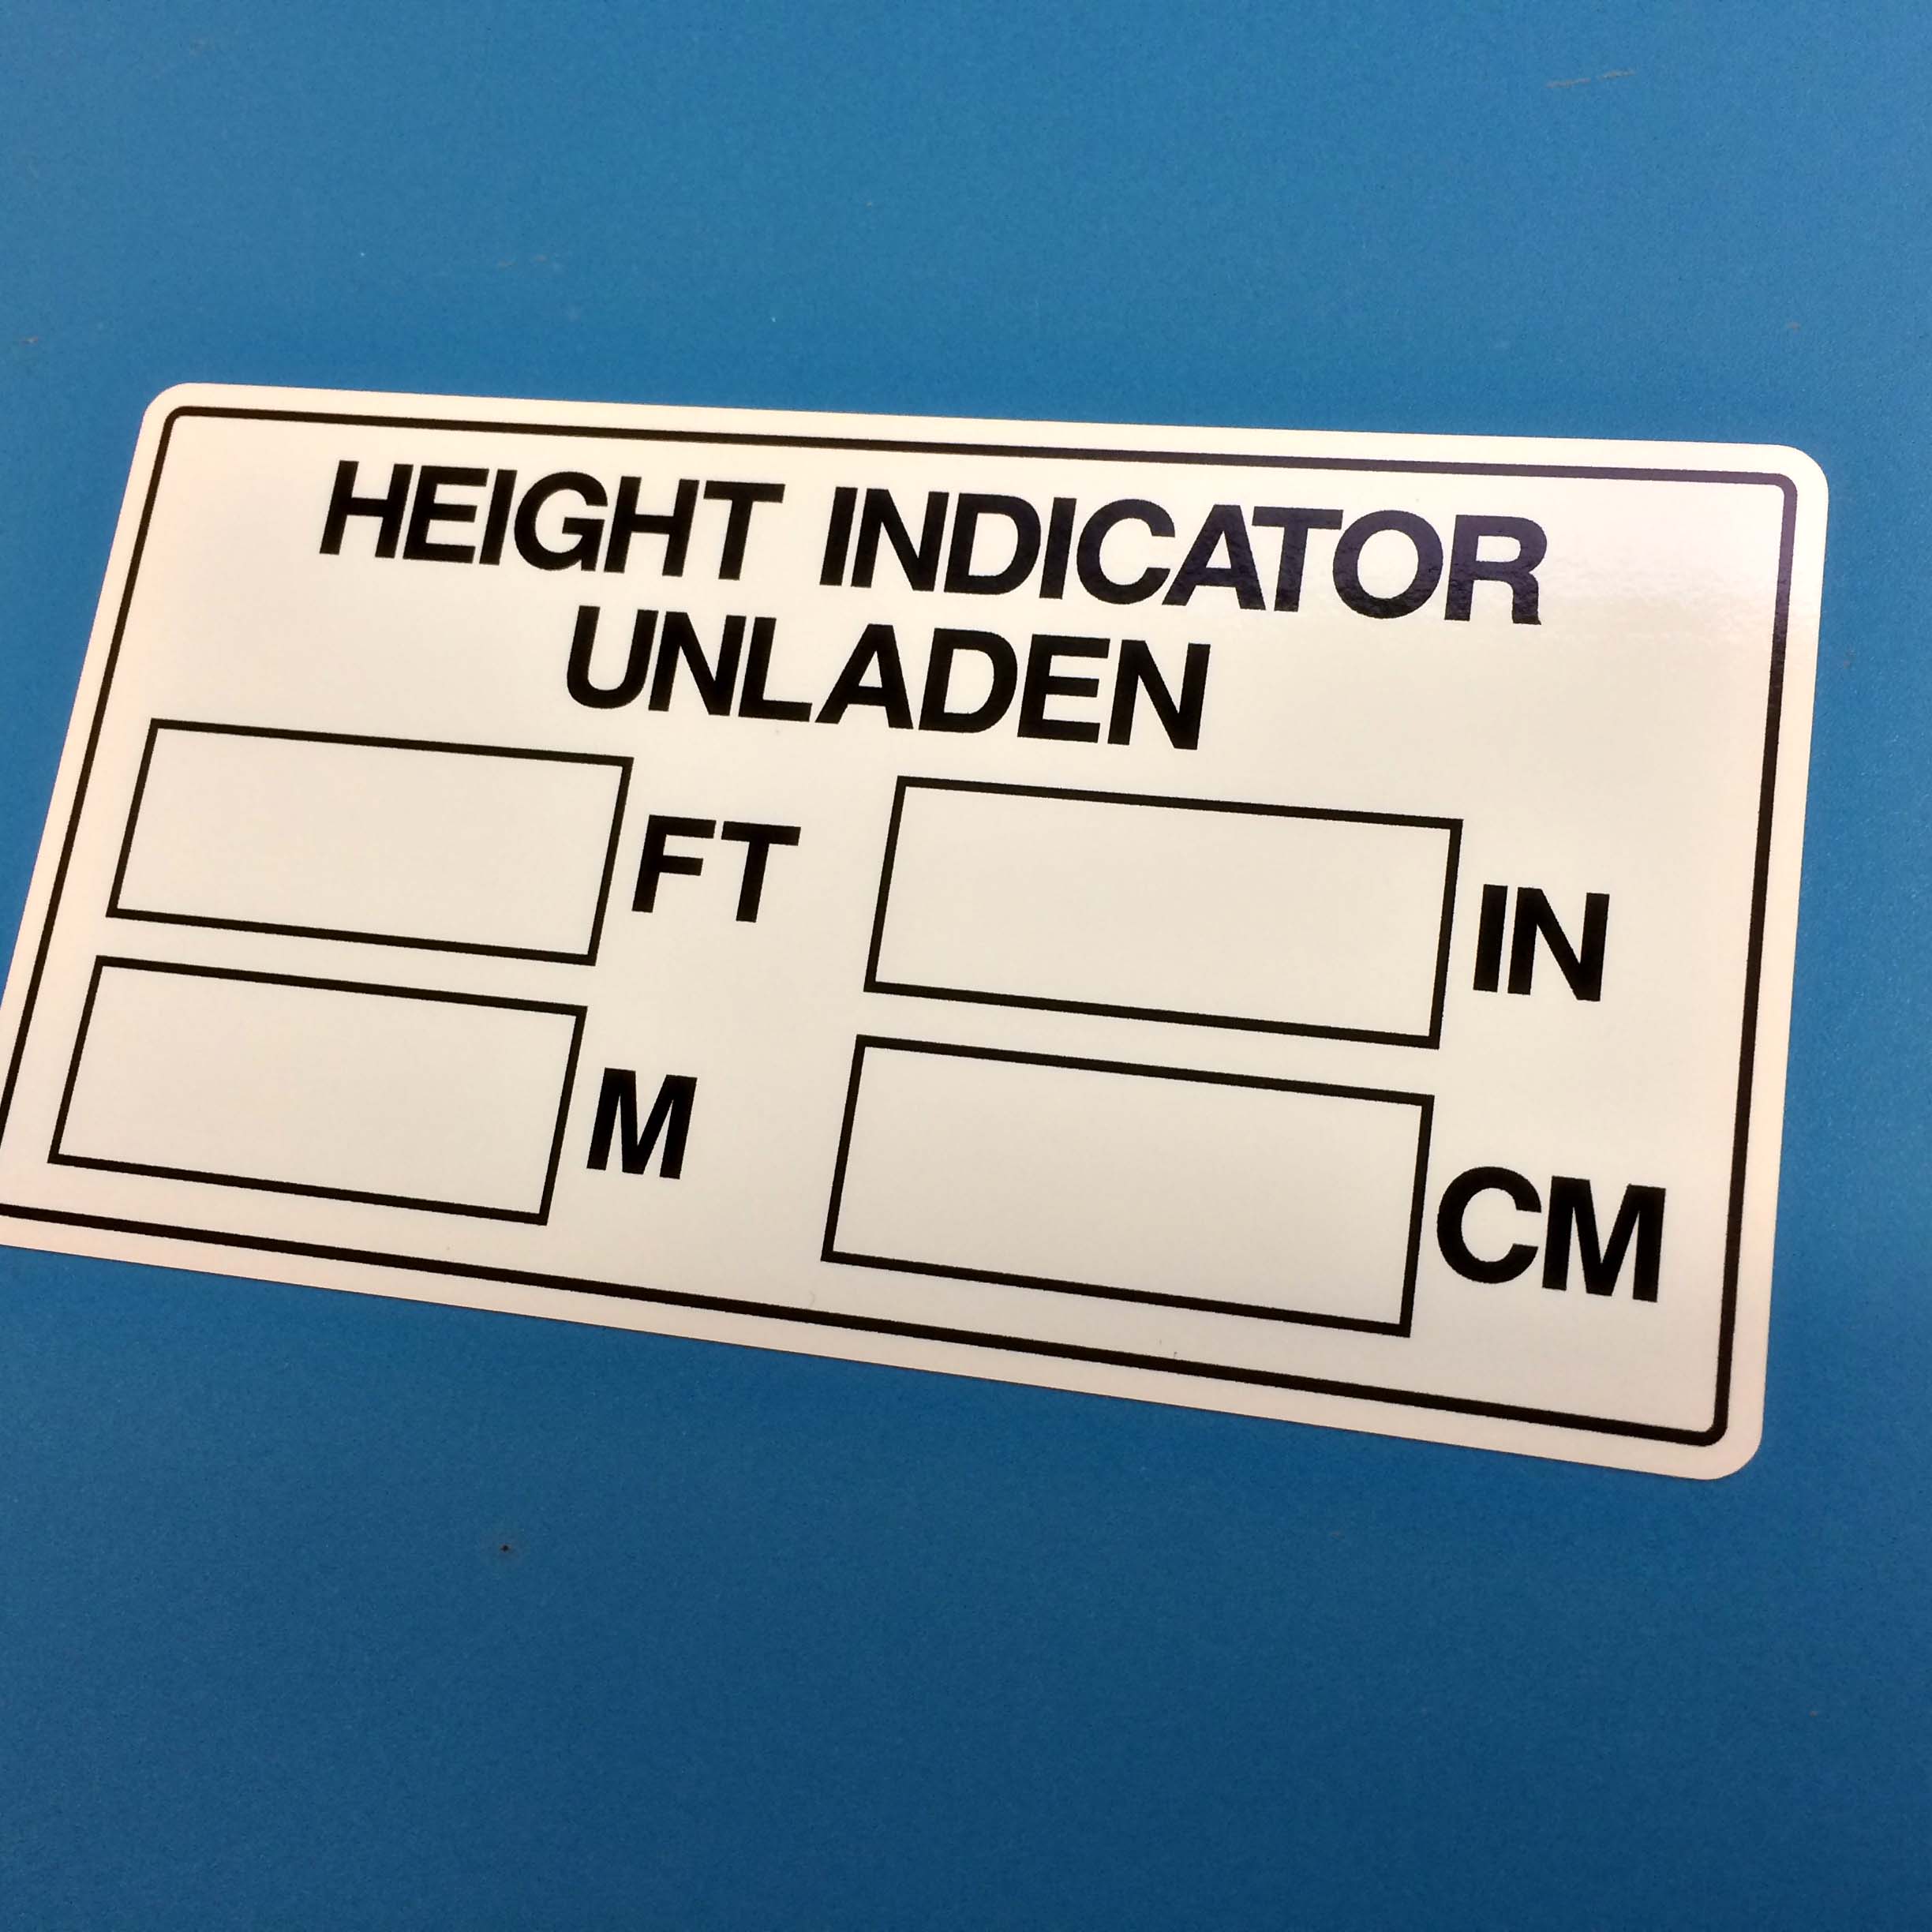 COMMERCIAL VEHICLE CAB HEIGHT INDICATOR HGV STICKER IMPERIAL METRIC. Height Indicator Unladen in black uppercase lettering on a white sticker. Below are four rectangular boxes labelled Ft, In, M and Cm.